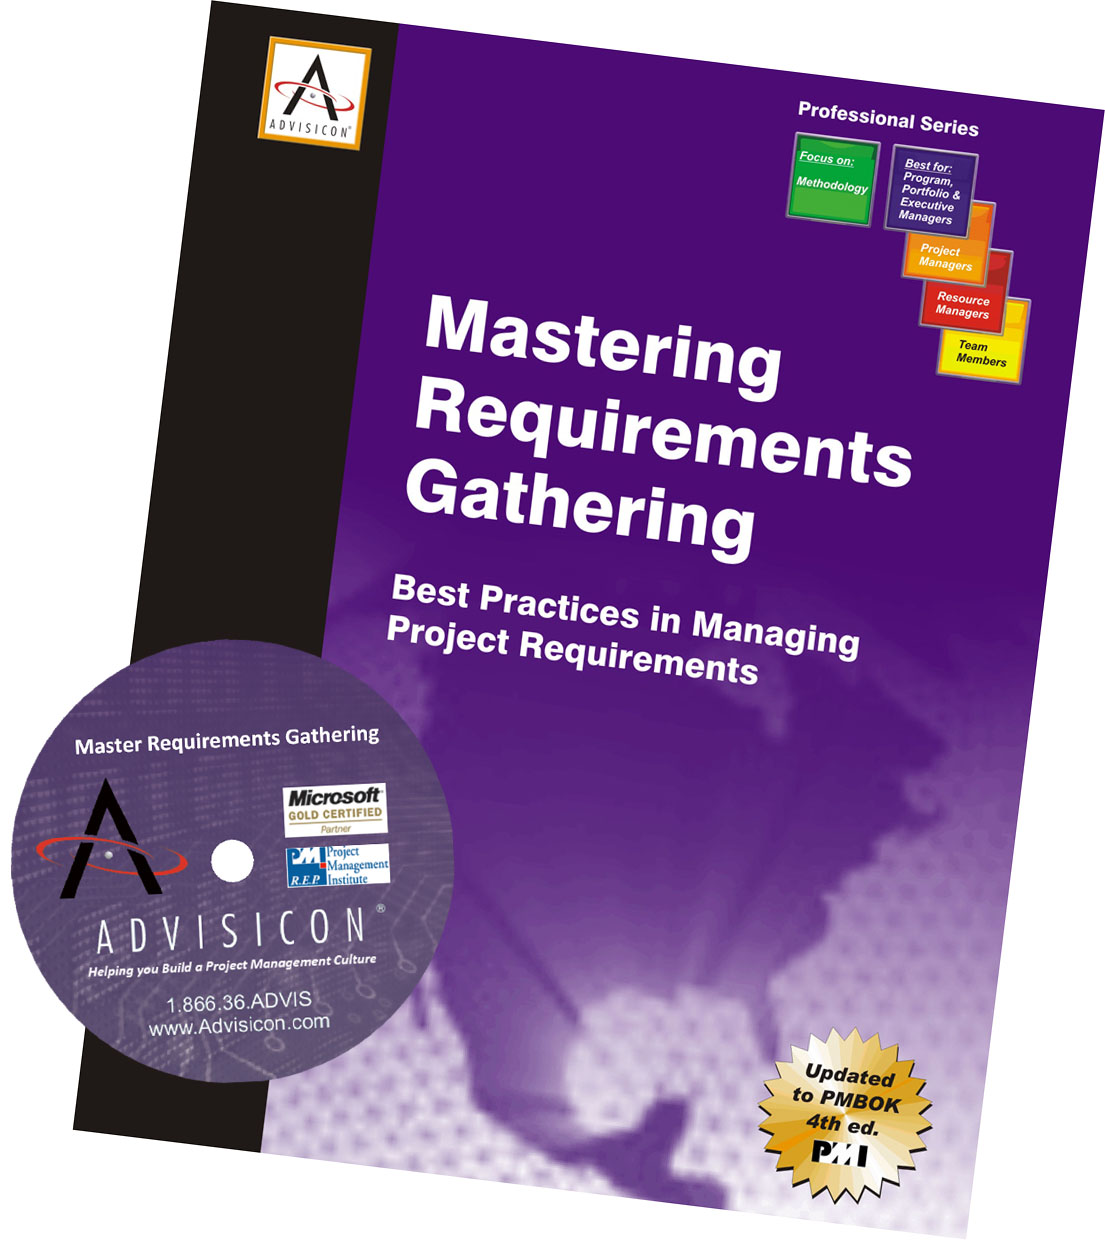 Mastering Requirements Gathering book & CD